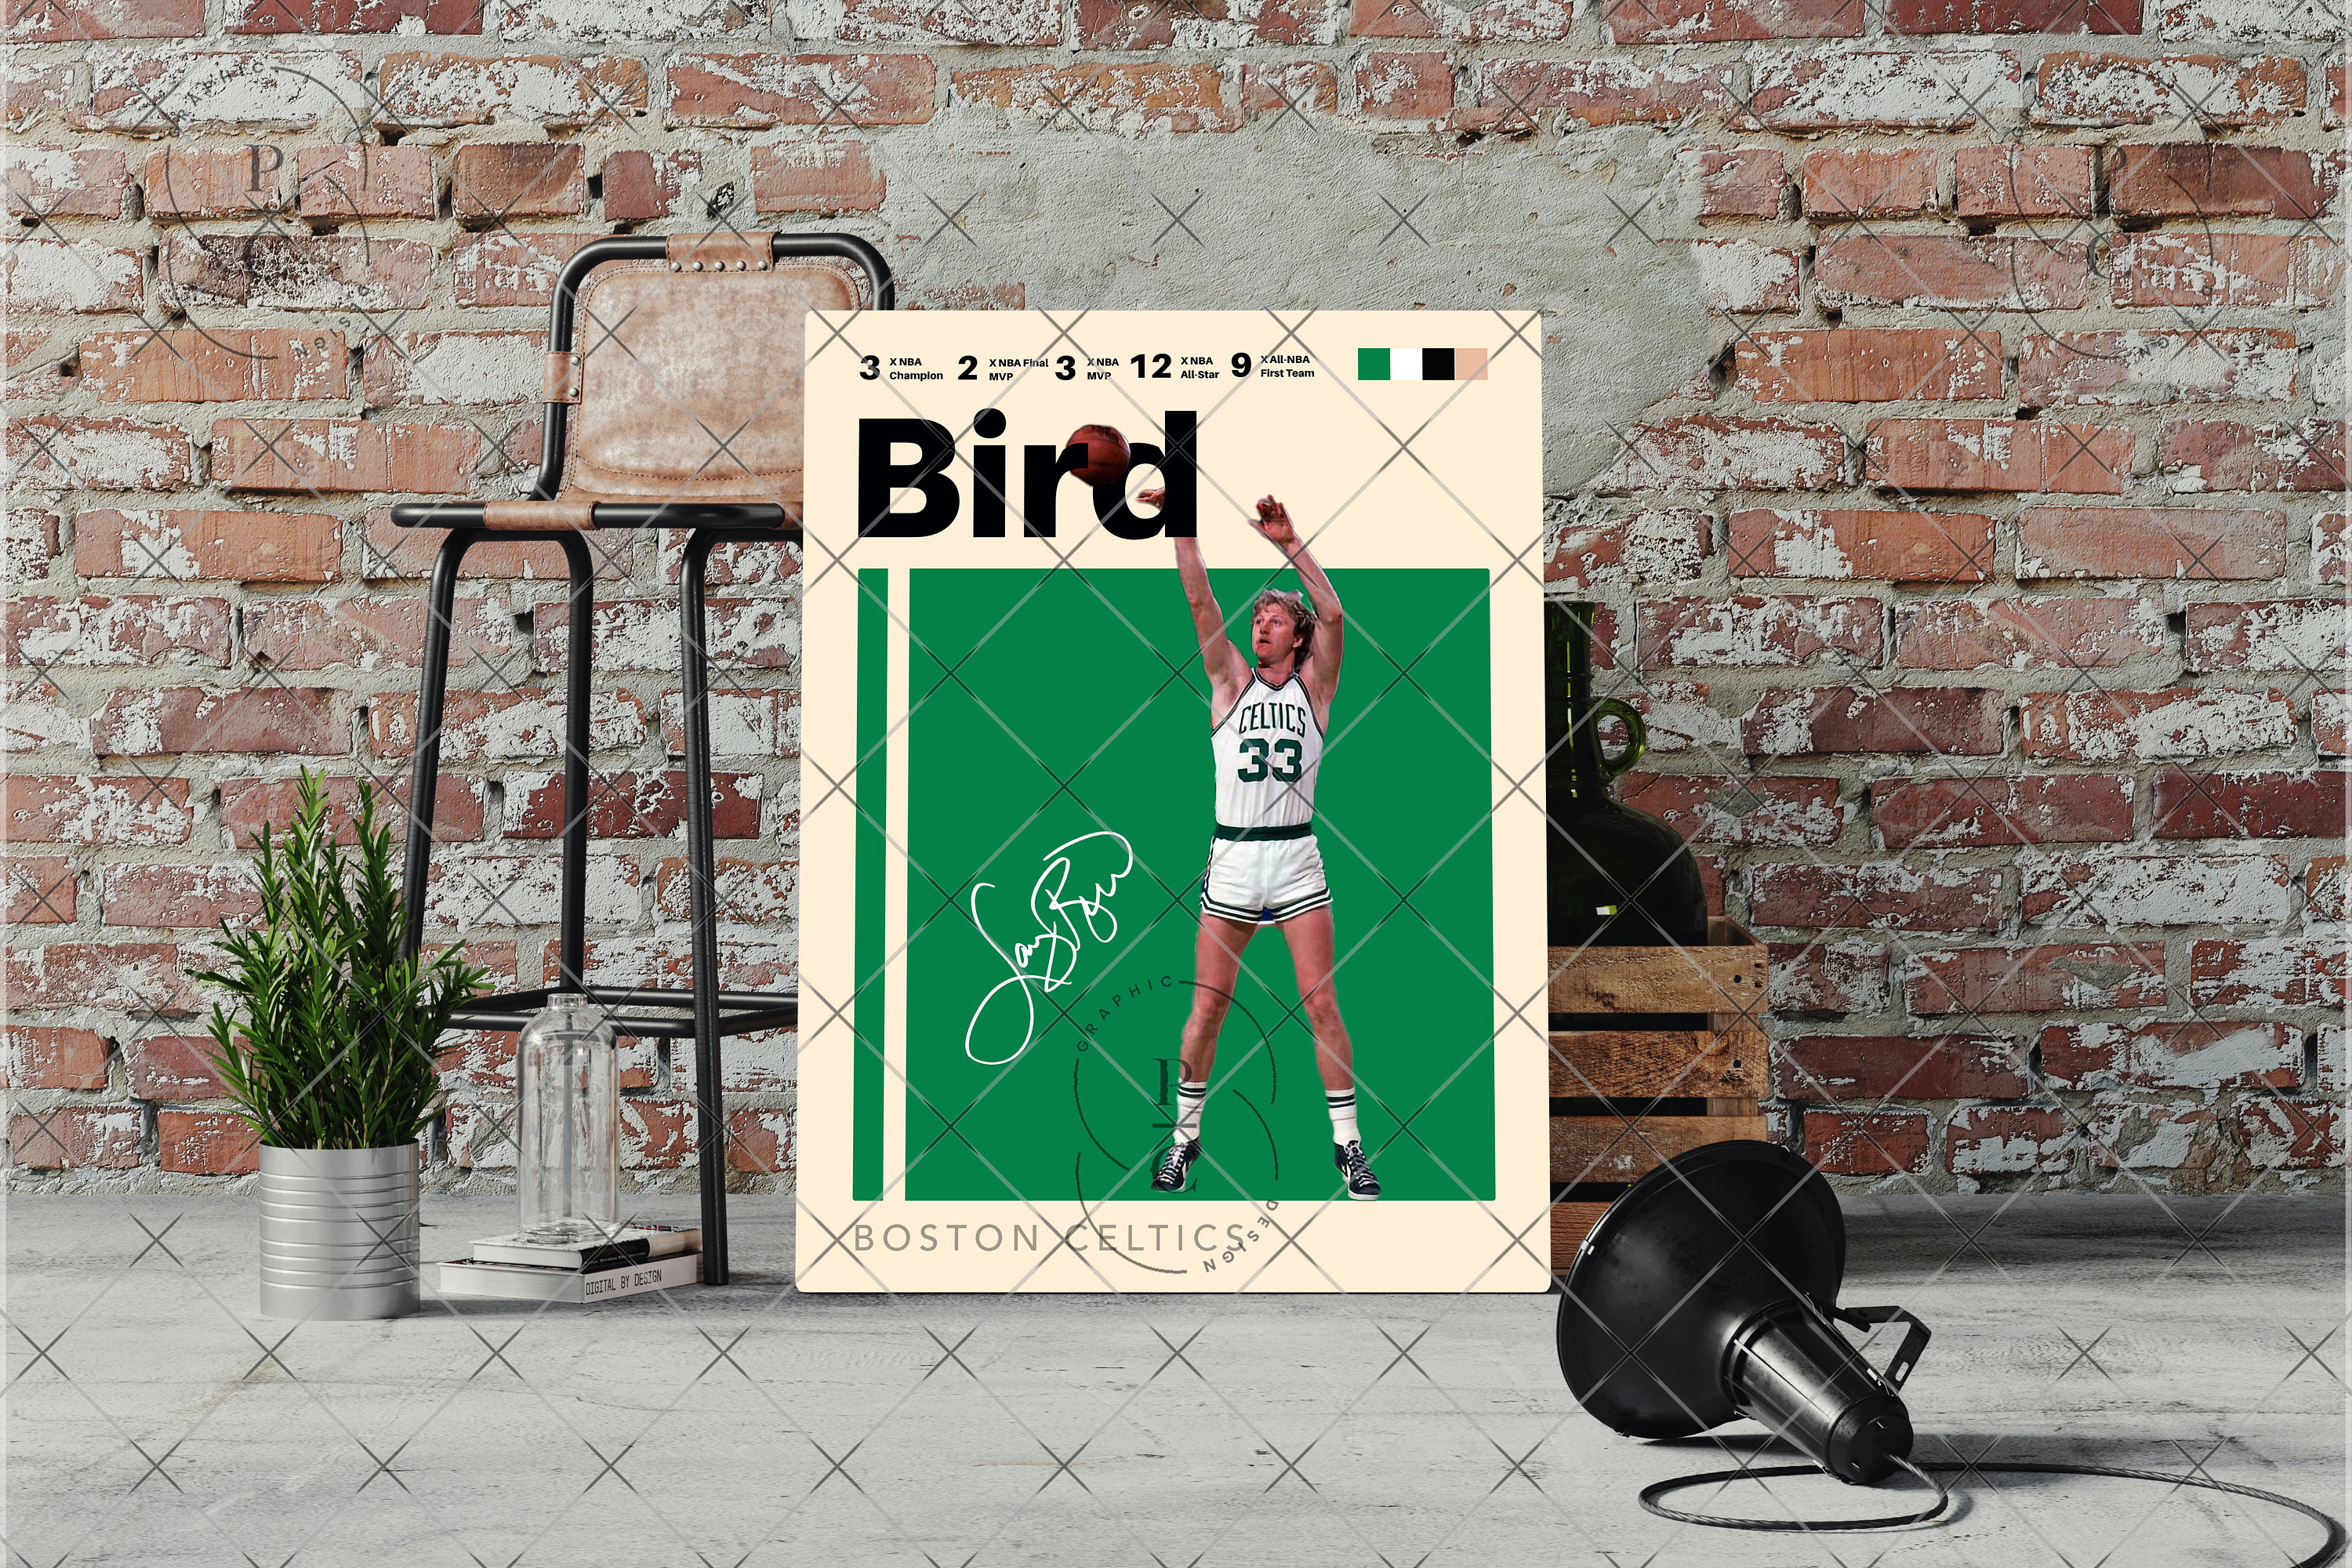 IZS Larry Bird And Magic Johnson Bump Fists Poster Decorative Painting  Canvas Wall Art Living Room Posters Bedroom Painting 16x24inch(40x60cm)